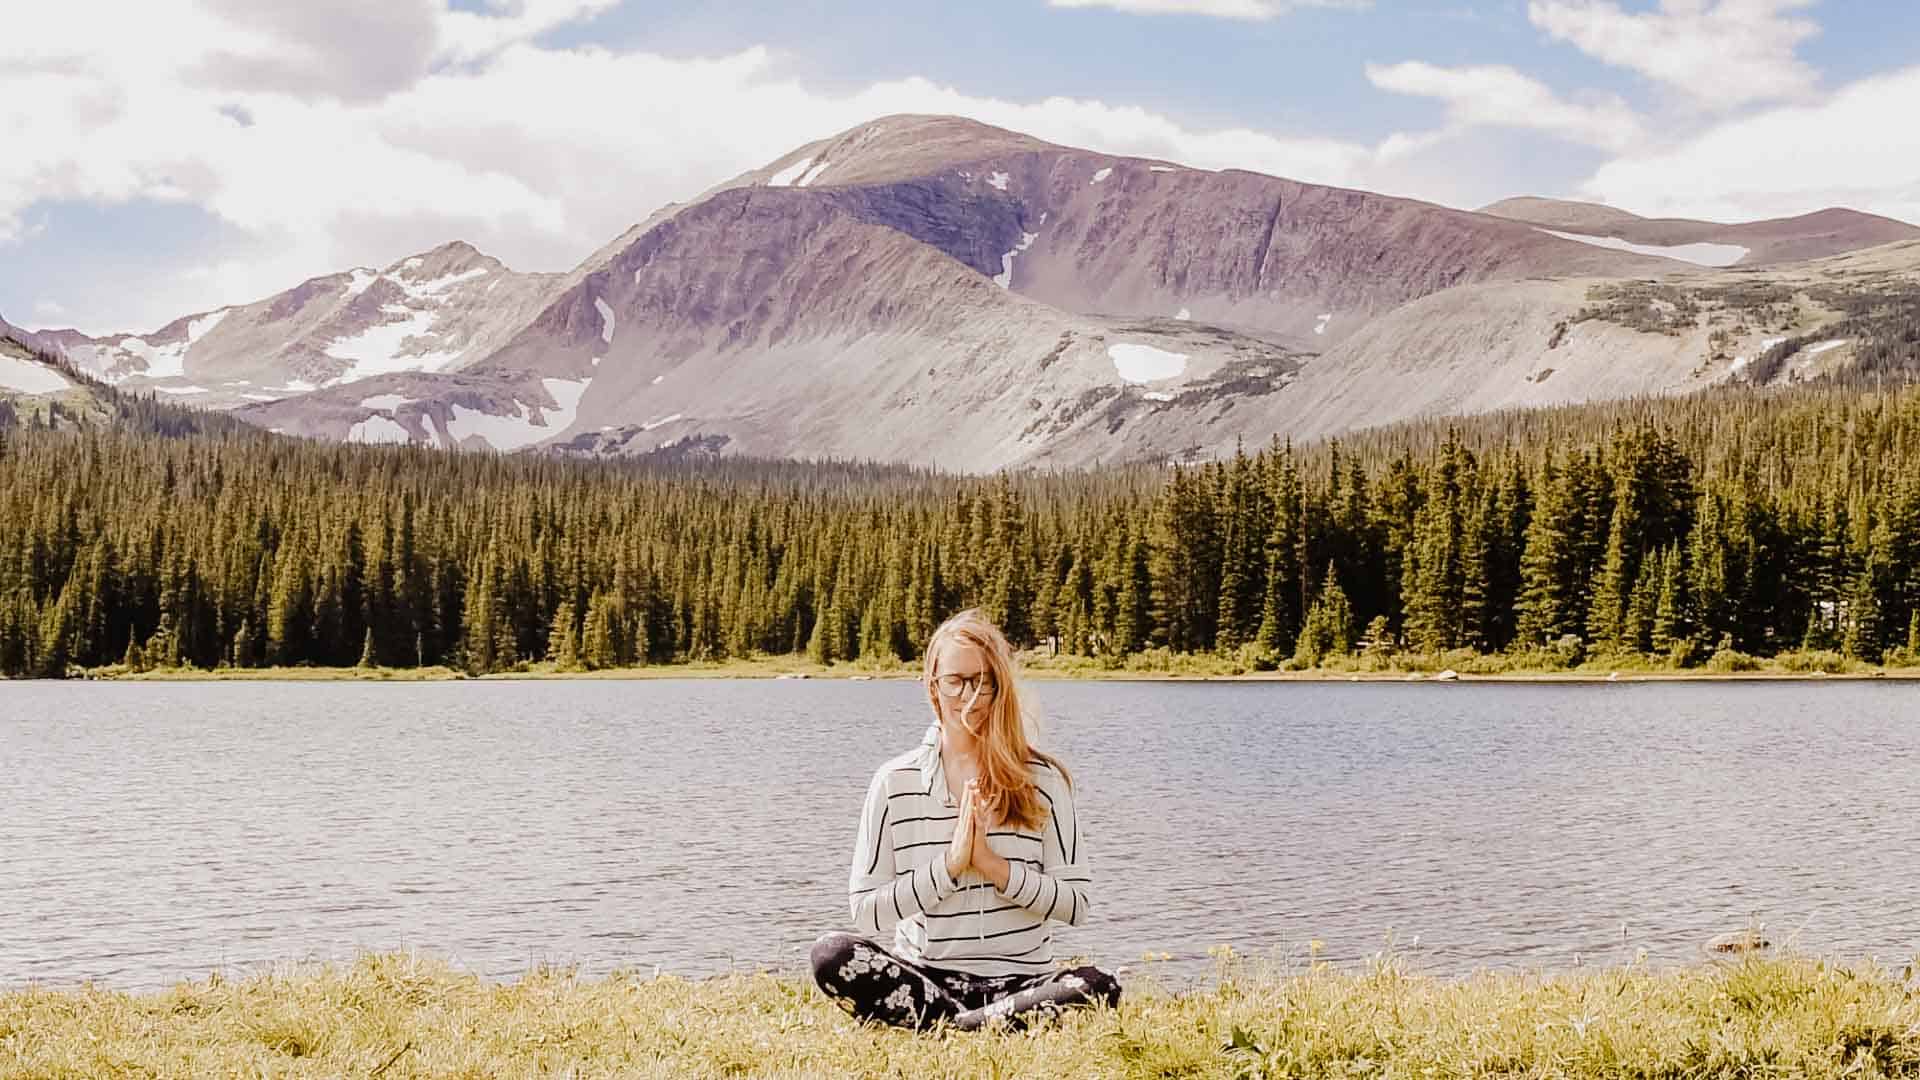 Lumalia sitting near mountain doing yoga and meditation as a part of the 30-day self-care challenge